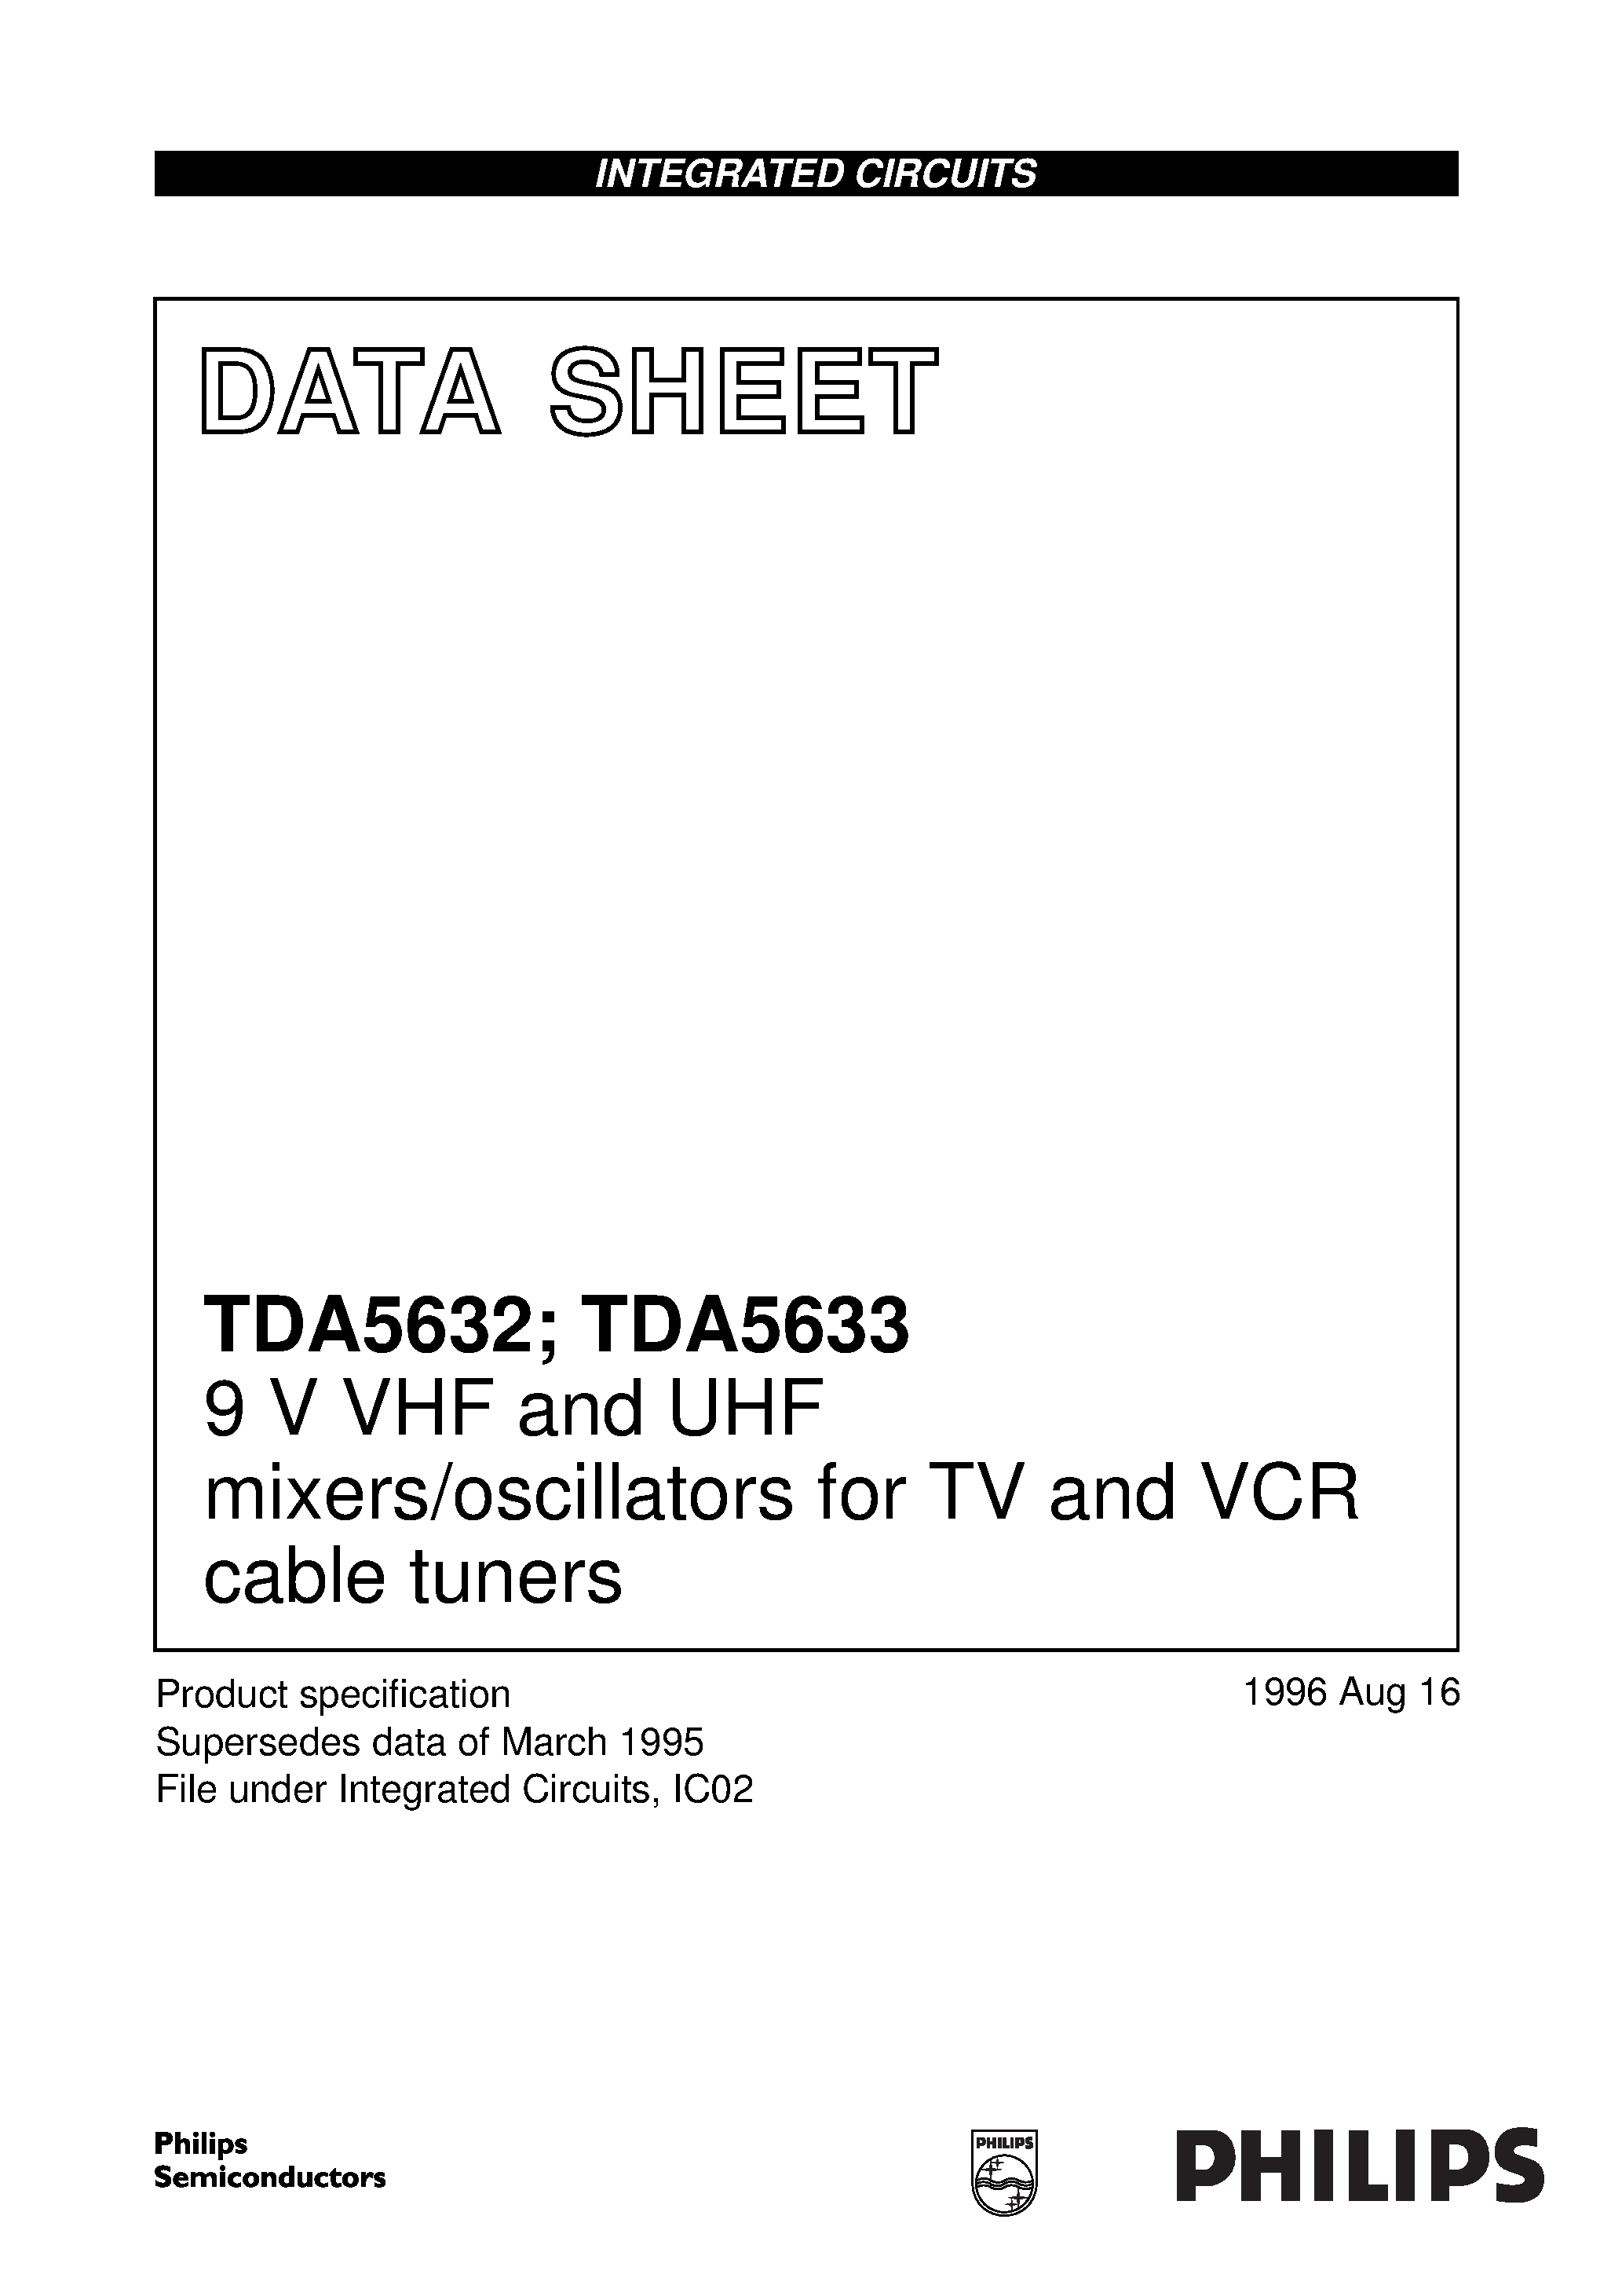 Даташит TDA5633 - 9 V VHF and UHF mixers/oscillators for TV and VCR cable tuners страница 1